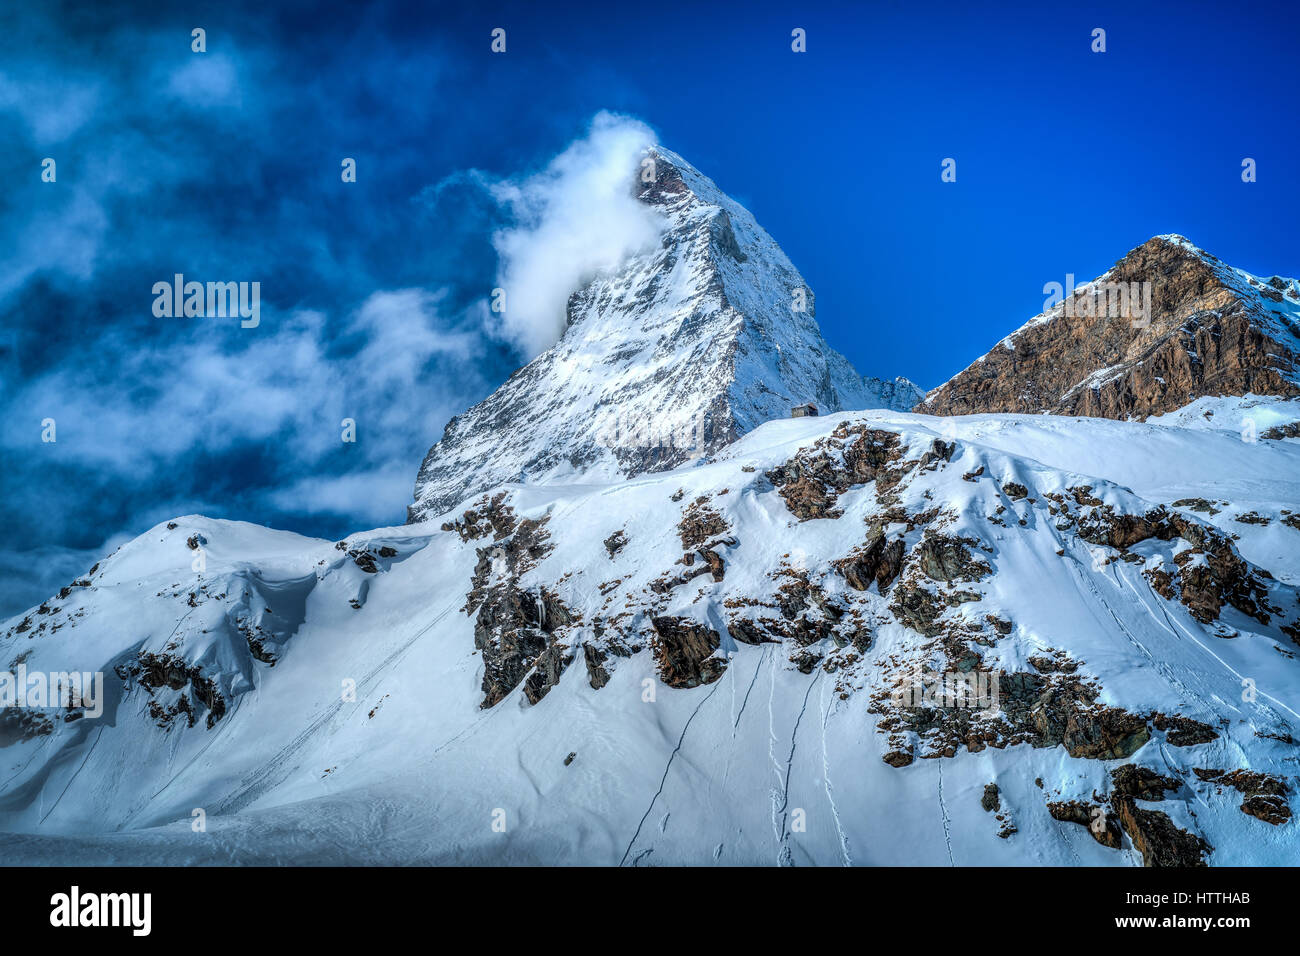 The icon of Switzerland, the Matterhorn, in Zermatt. It may be the highest mountain but it is certainly one of the most unique and beautiful. Stock Photo